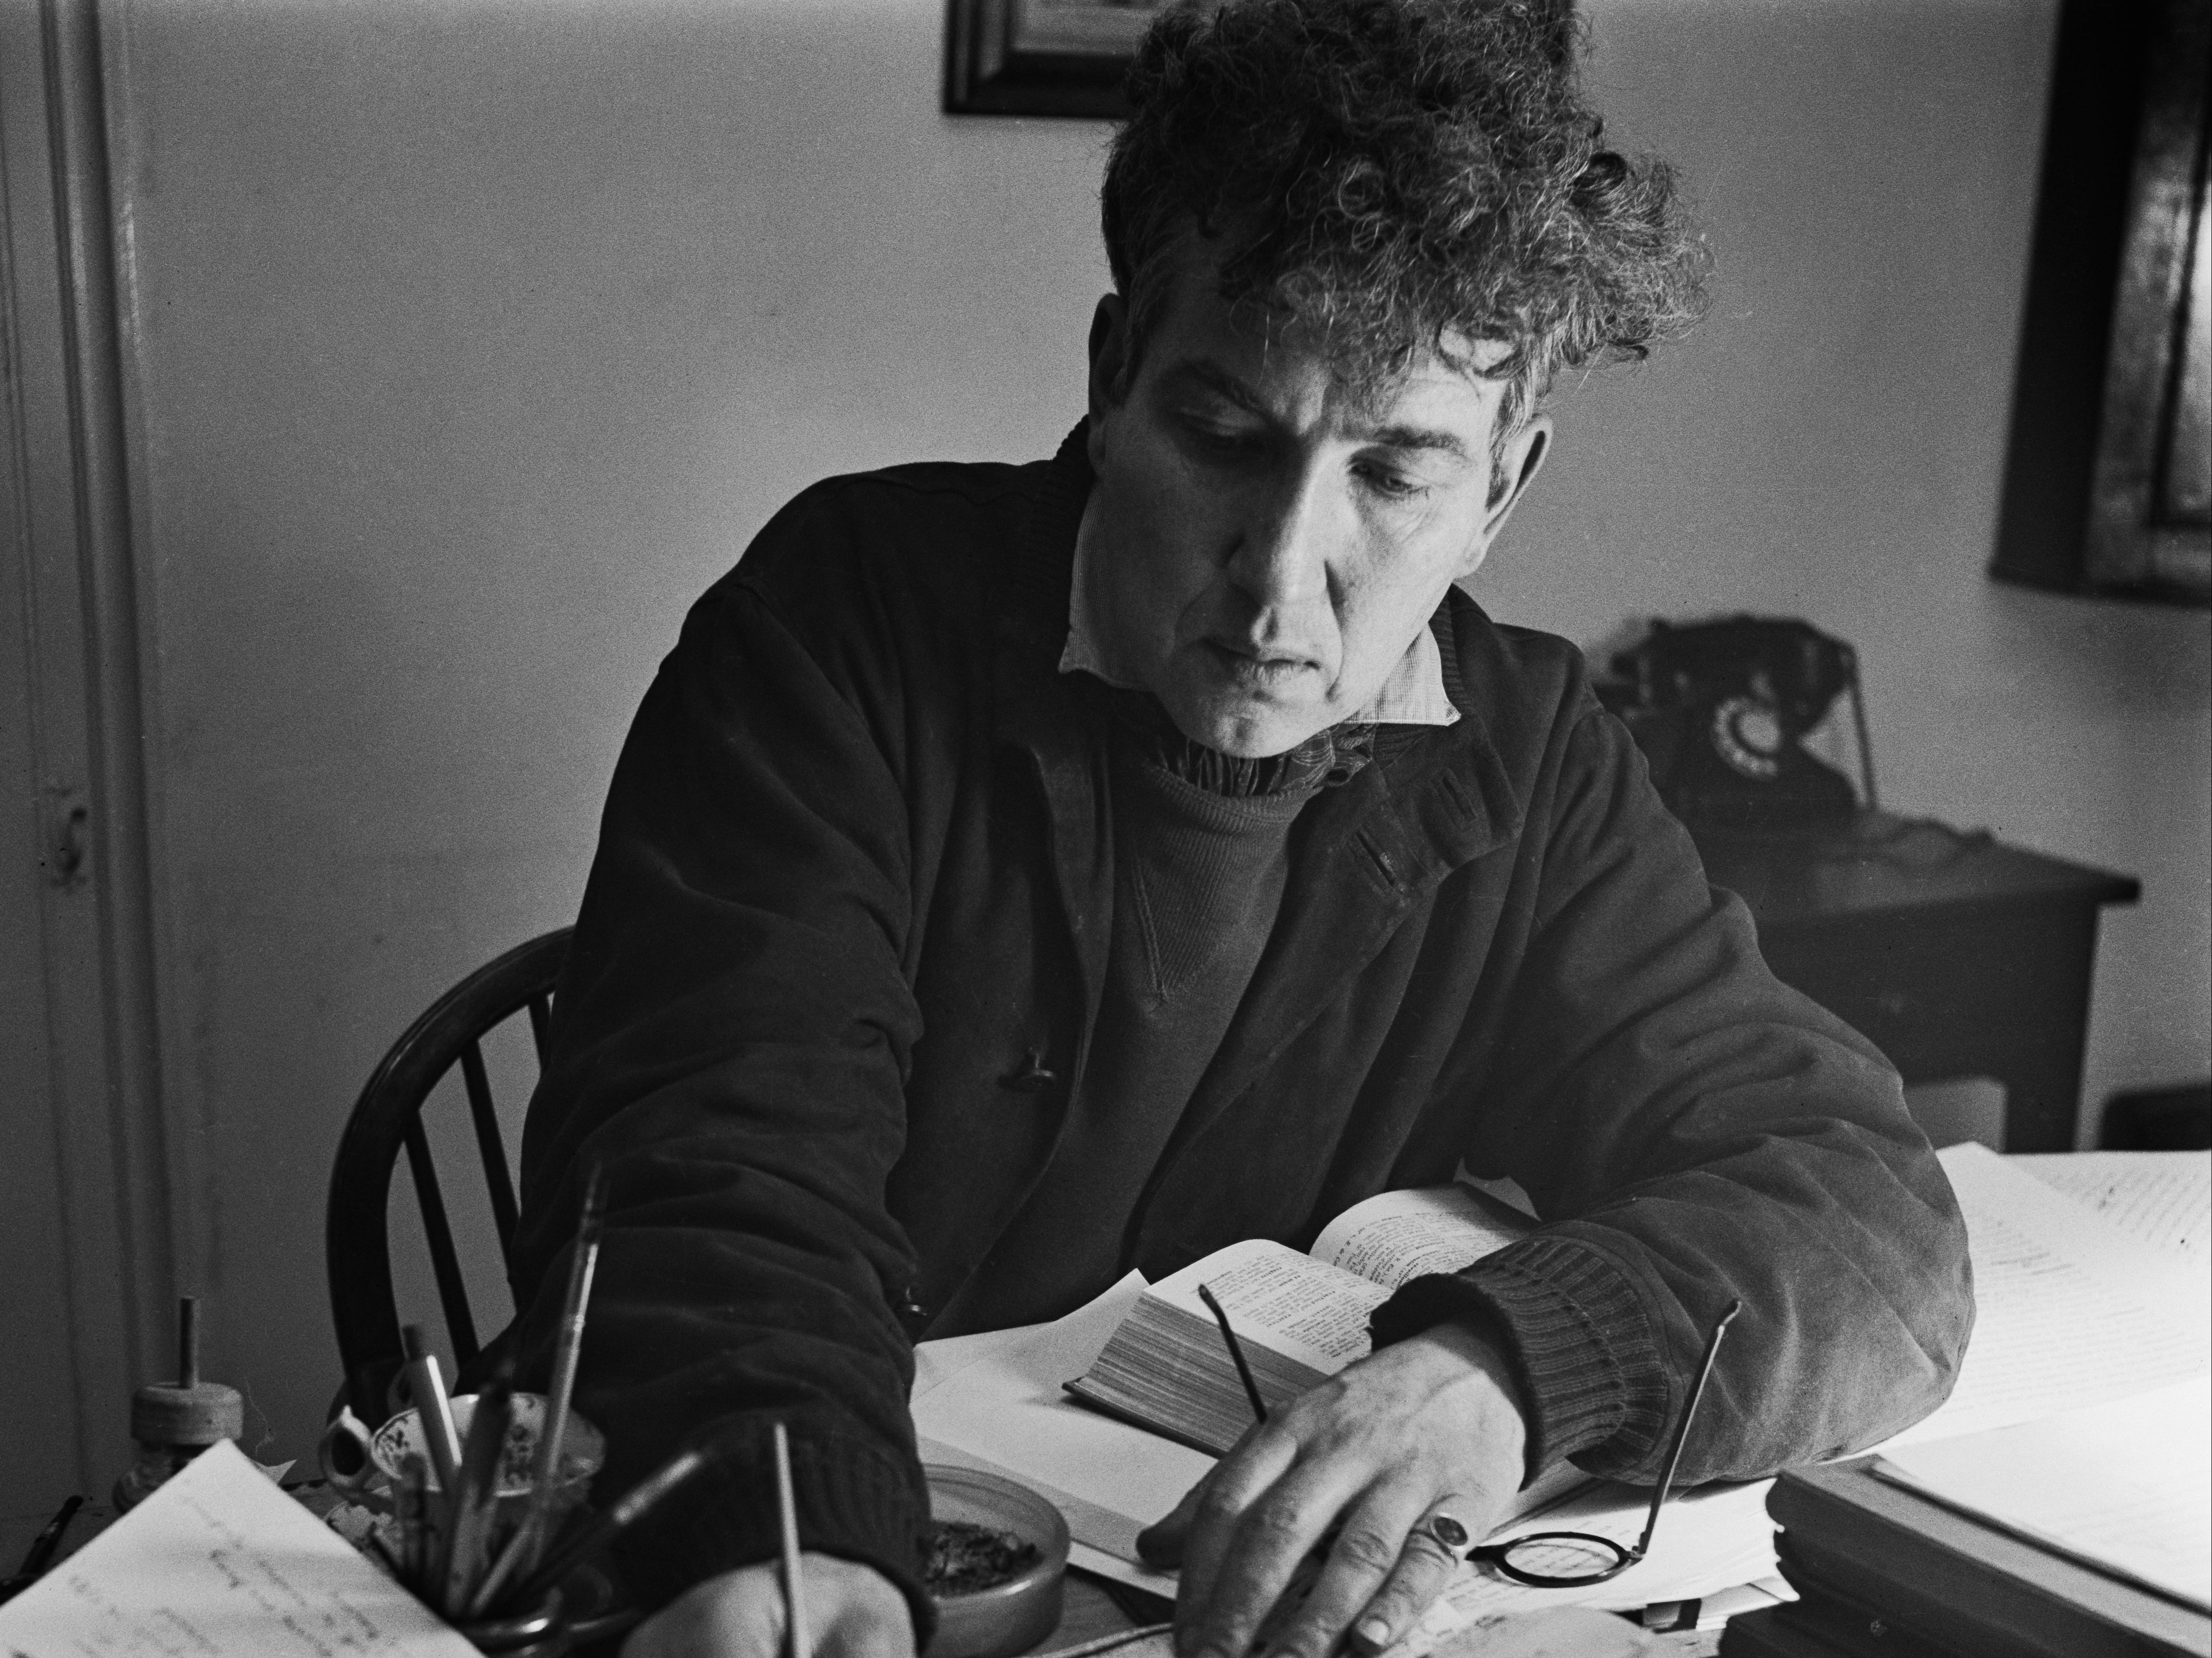 Robert Graves writing at Vale House, his home in Galmpton near Brixham, Devon, in December 1941